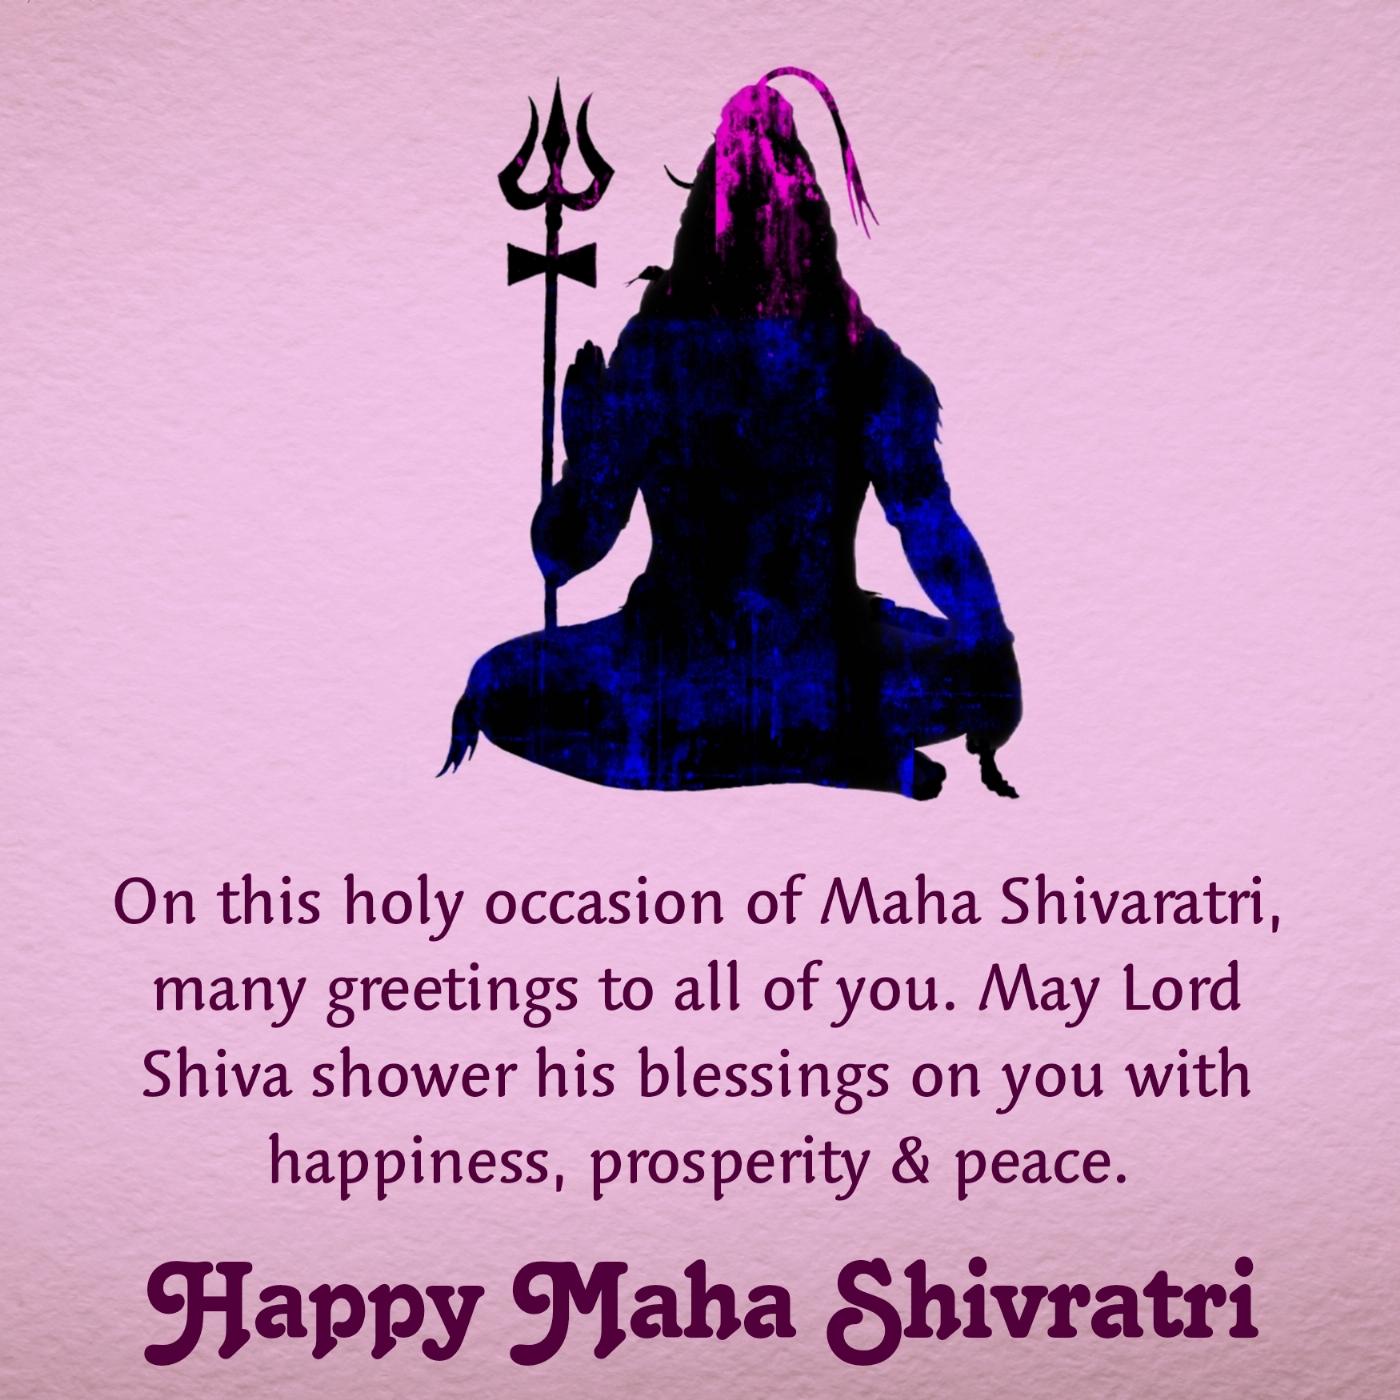 On this holy occasion of Maha Shivaratri many greetings to all of you